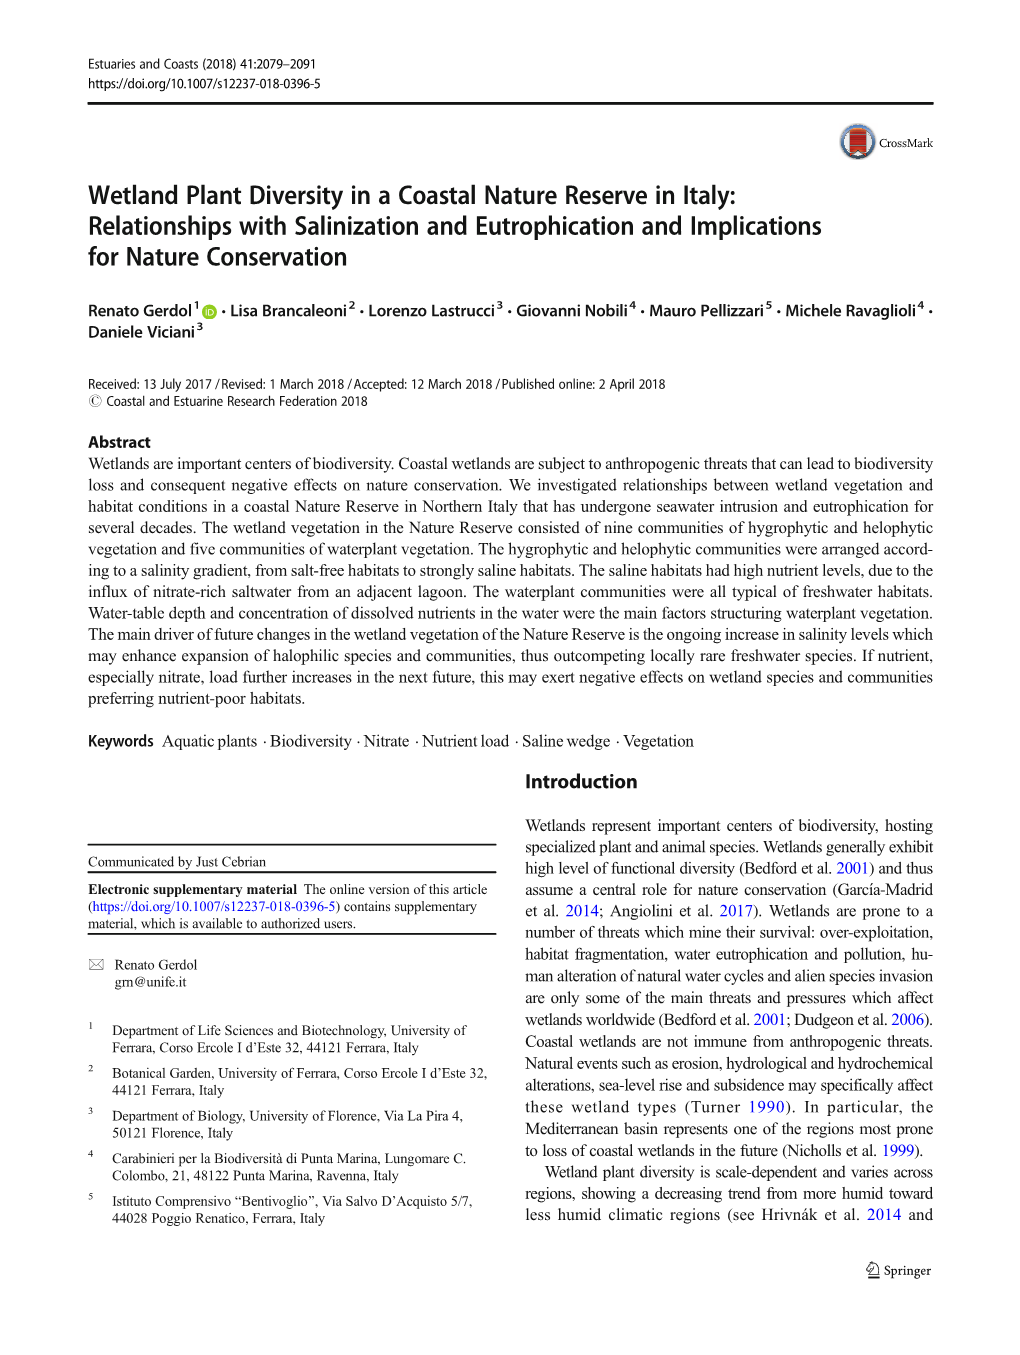 Wetland Plant Diversity in a Coastal Nature Reserve in Italy: Relationships with Salinization and Eutrophication and Implications for Nature Conservation